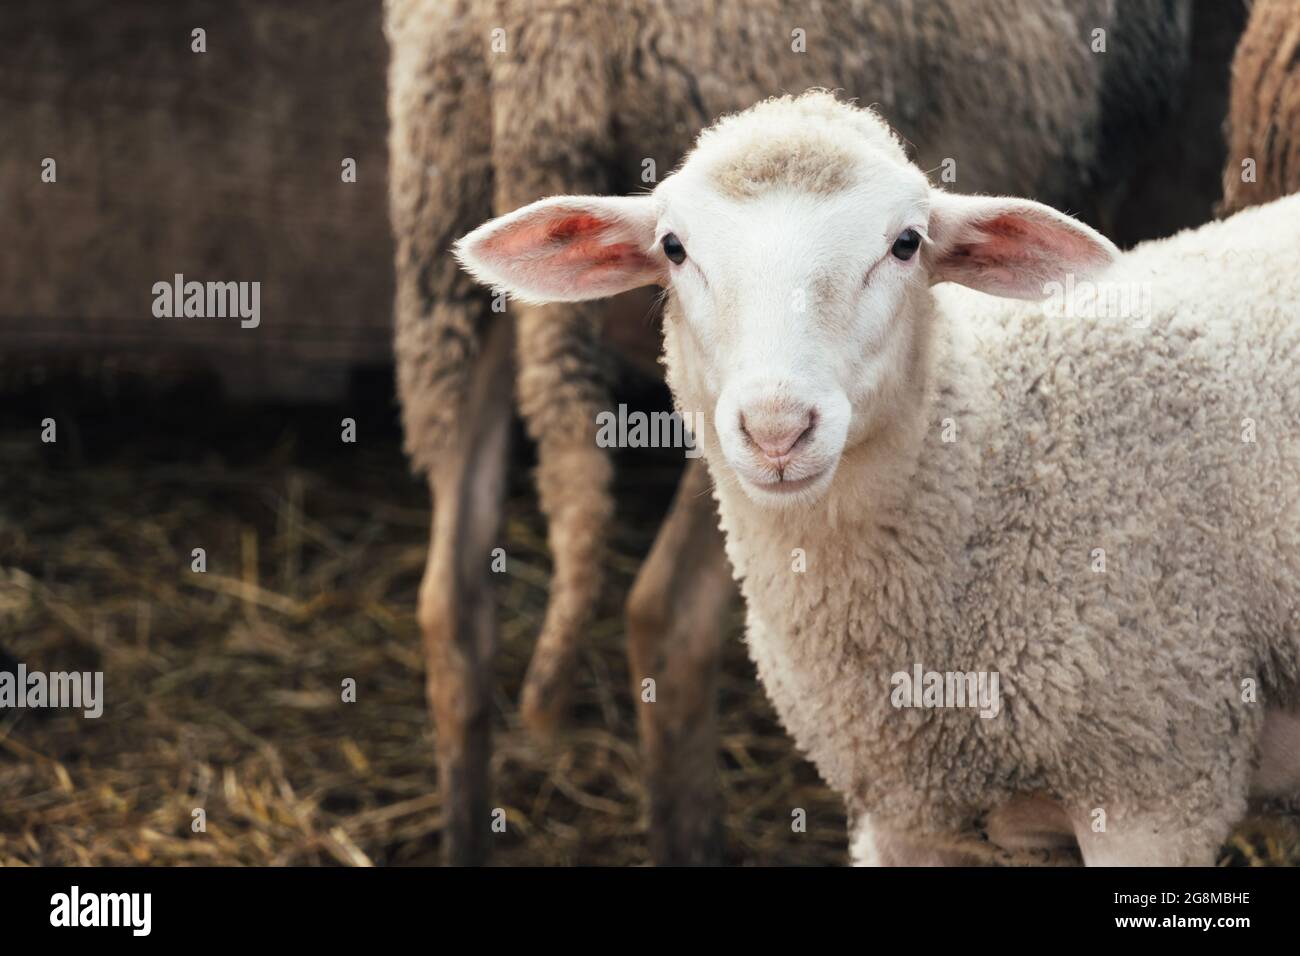 Portrait of a young sheep looking at the camera on the farm. Stock Photo